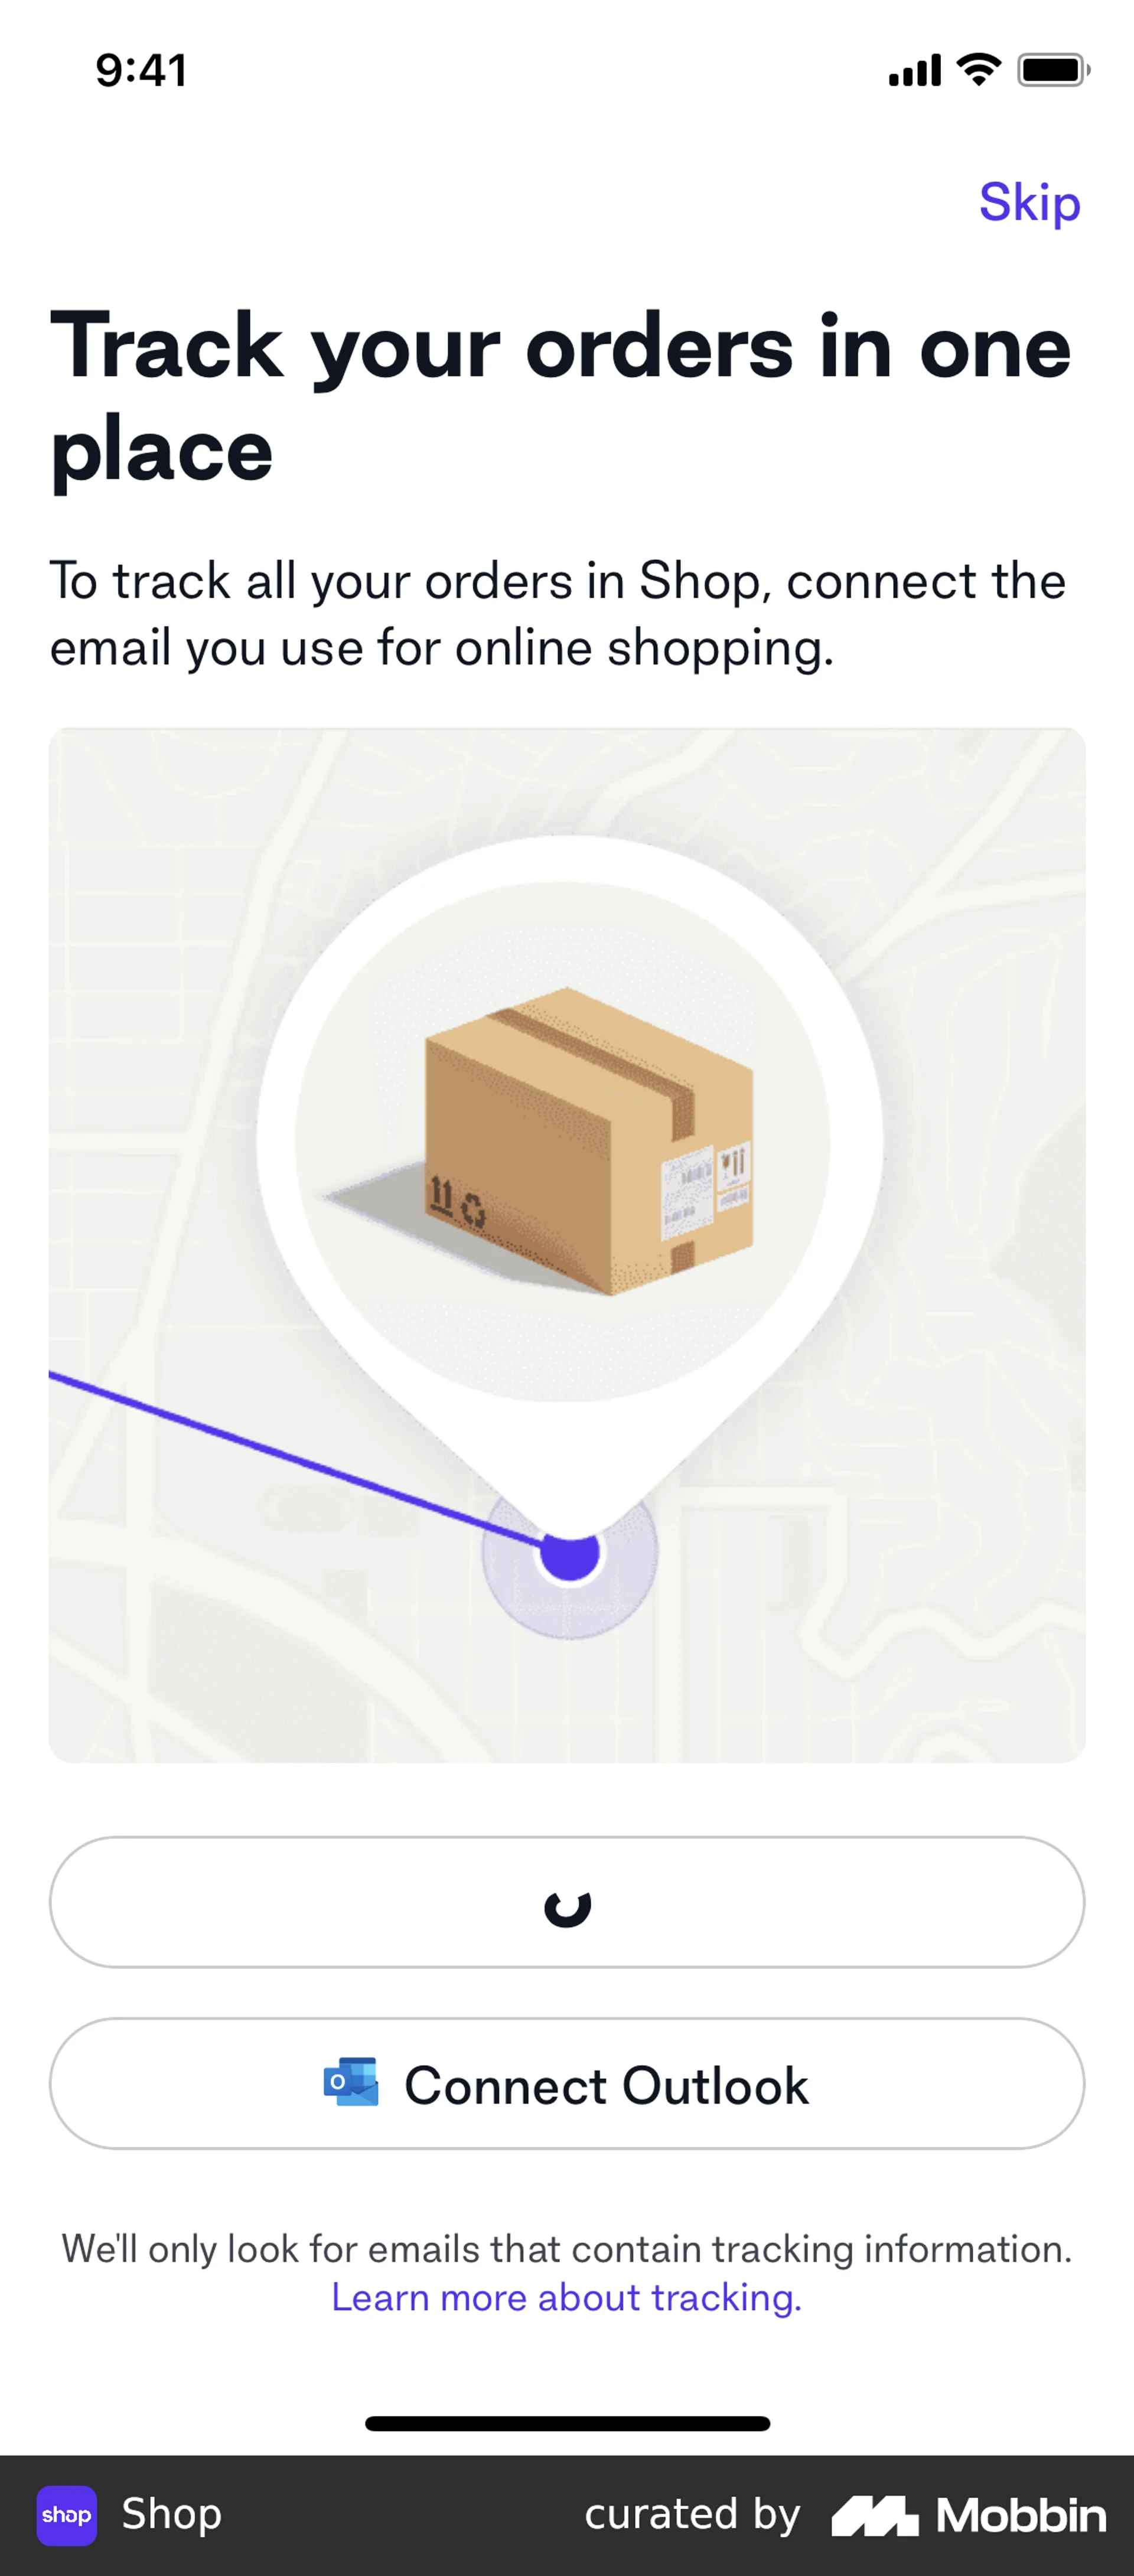  My Account Orders Placed Online Shopping Tracker: All